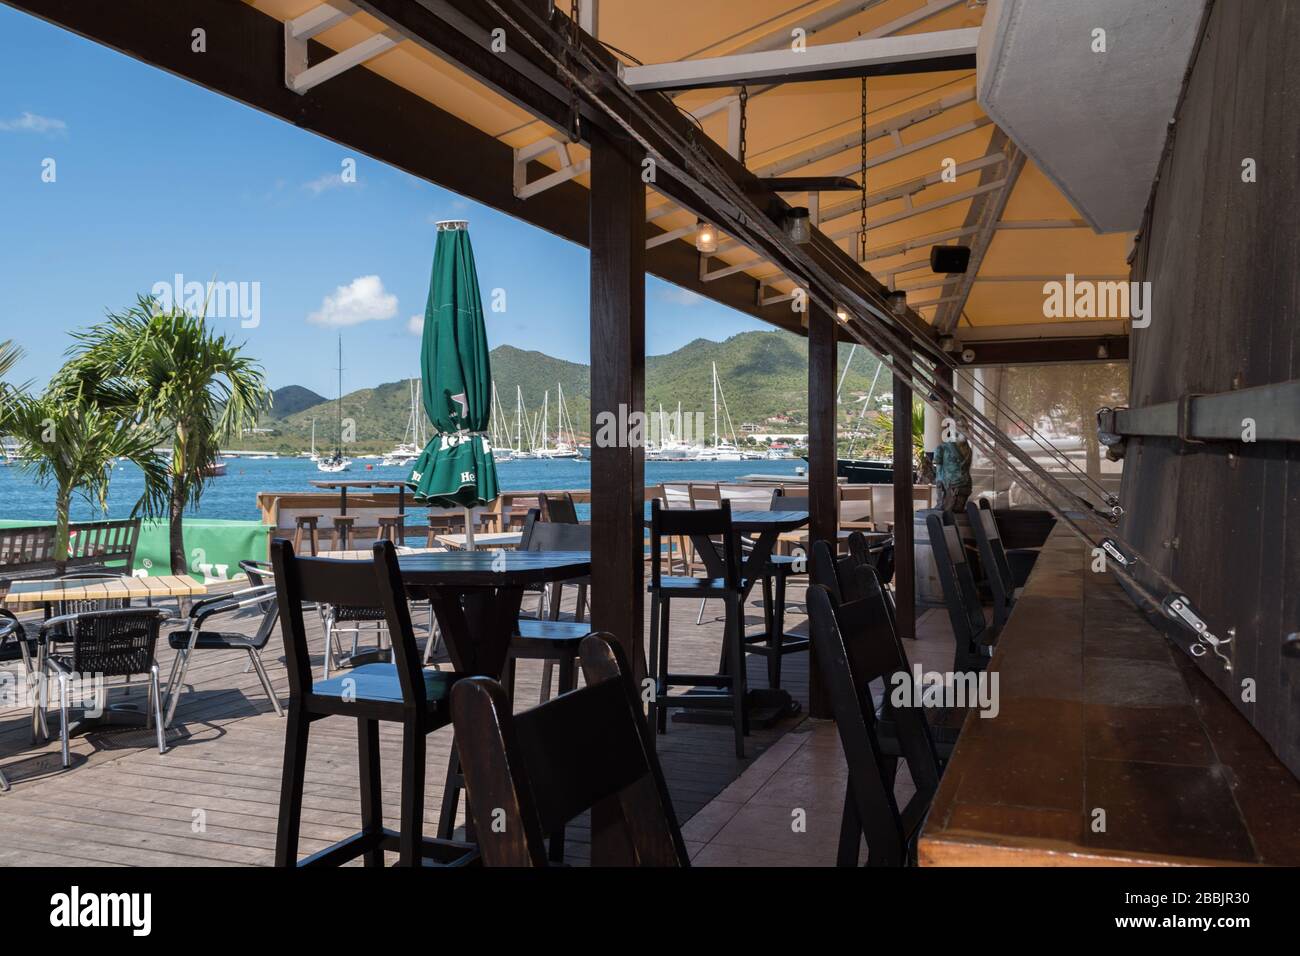 Impact of Covid-19 in the Caribbean: normally busy, shutters are down at SMYC Bar & Restaurant while closed in late March, April & May 2020 Stock Photo